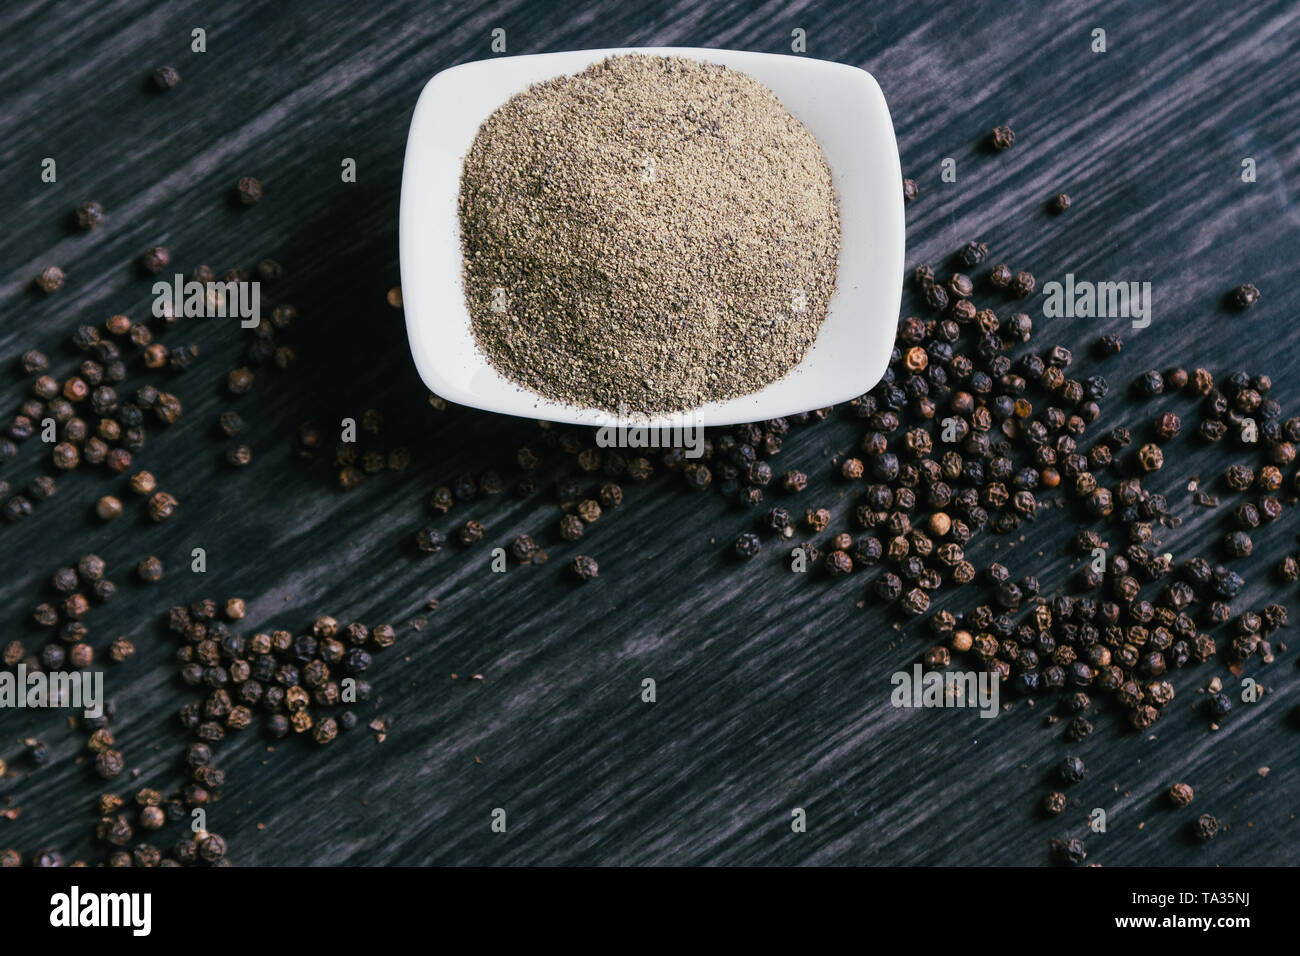 Black ground peppercorns in white bowl on wooden background. Stock Photo